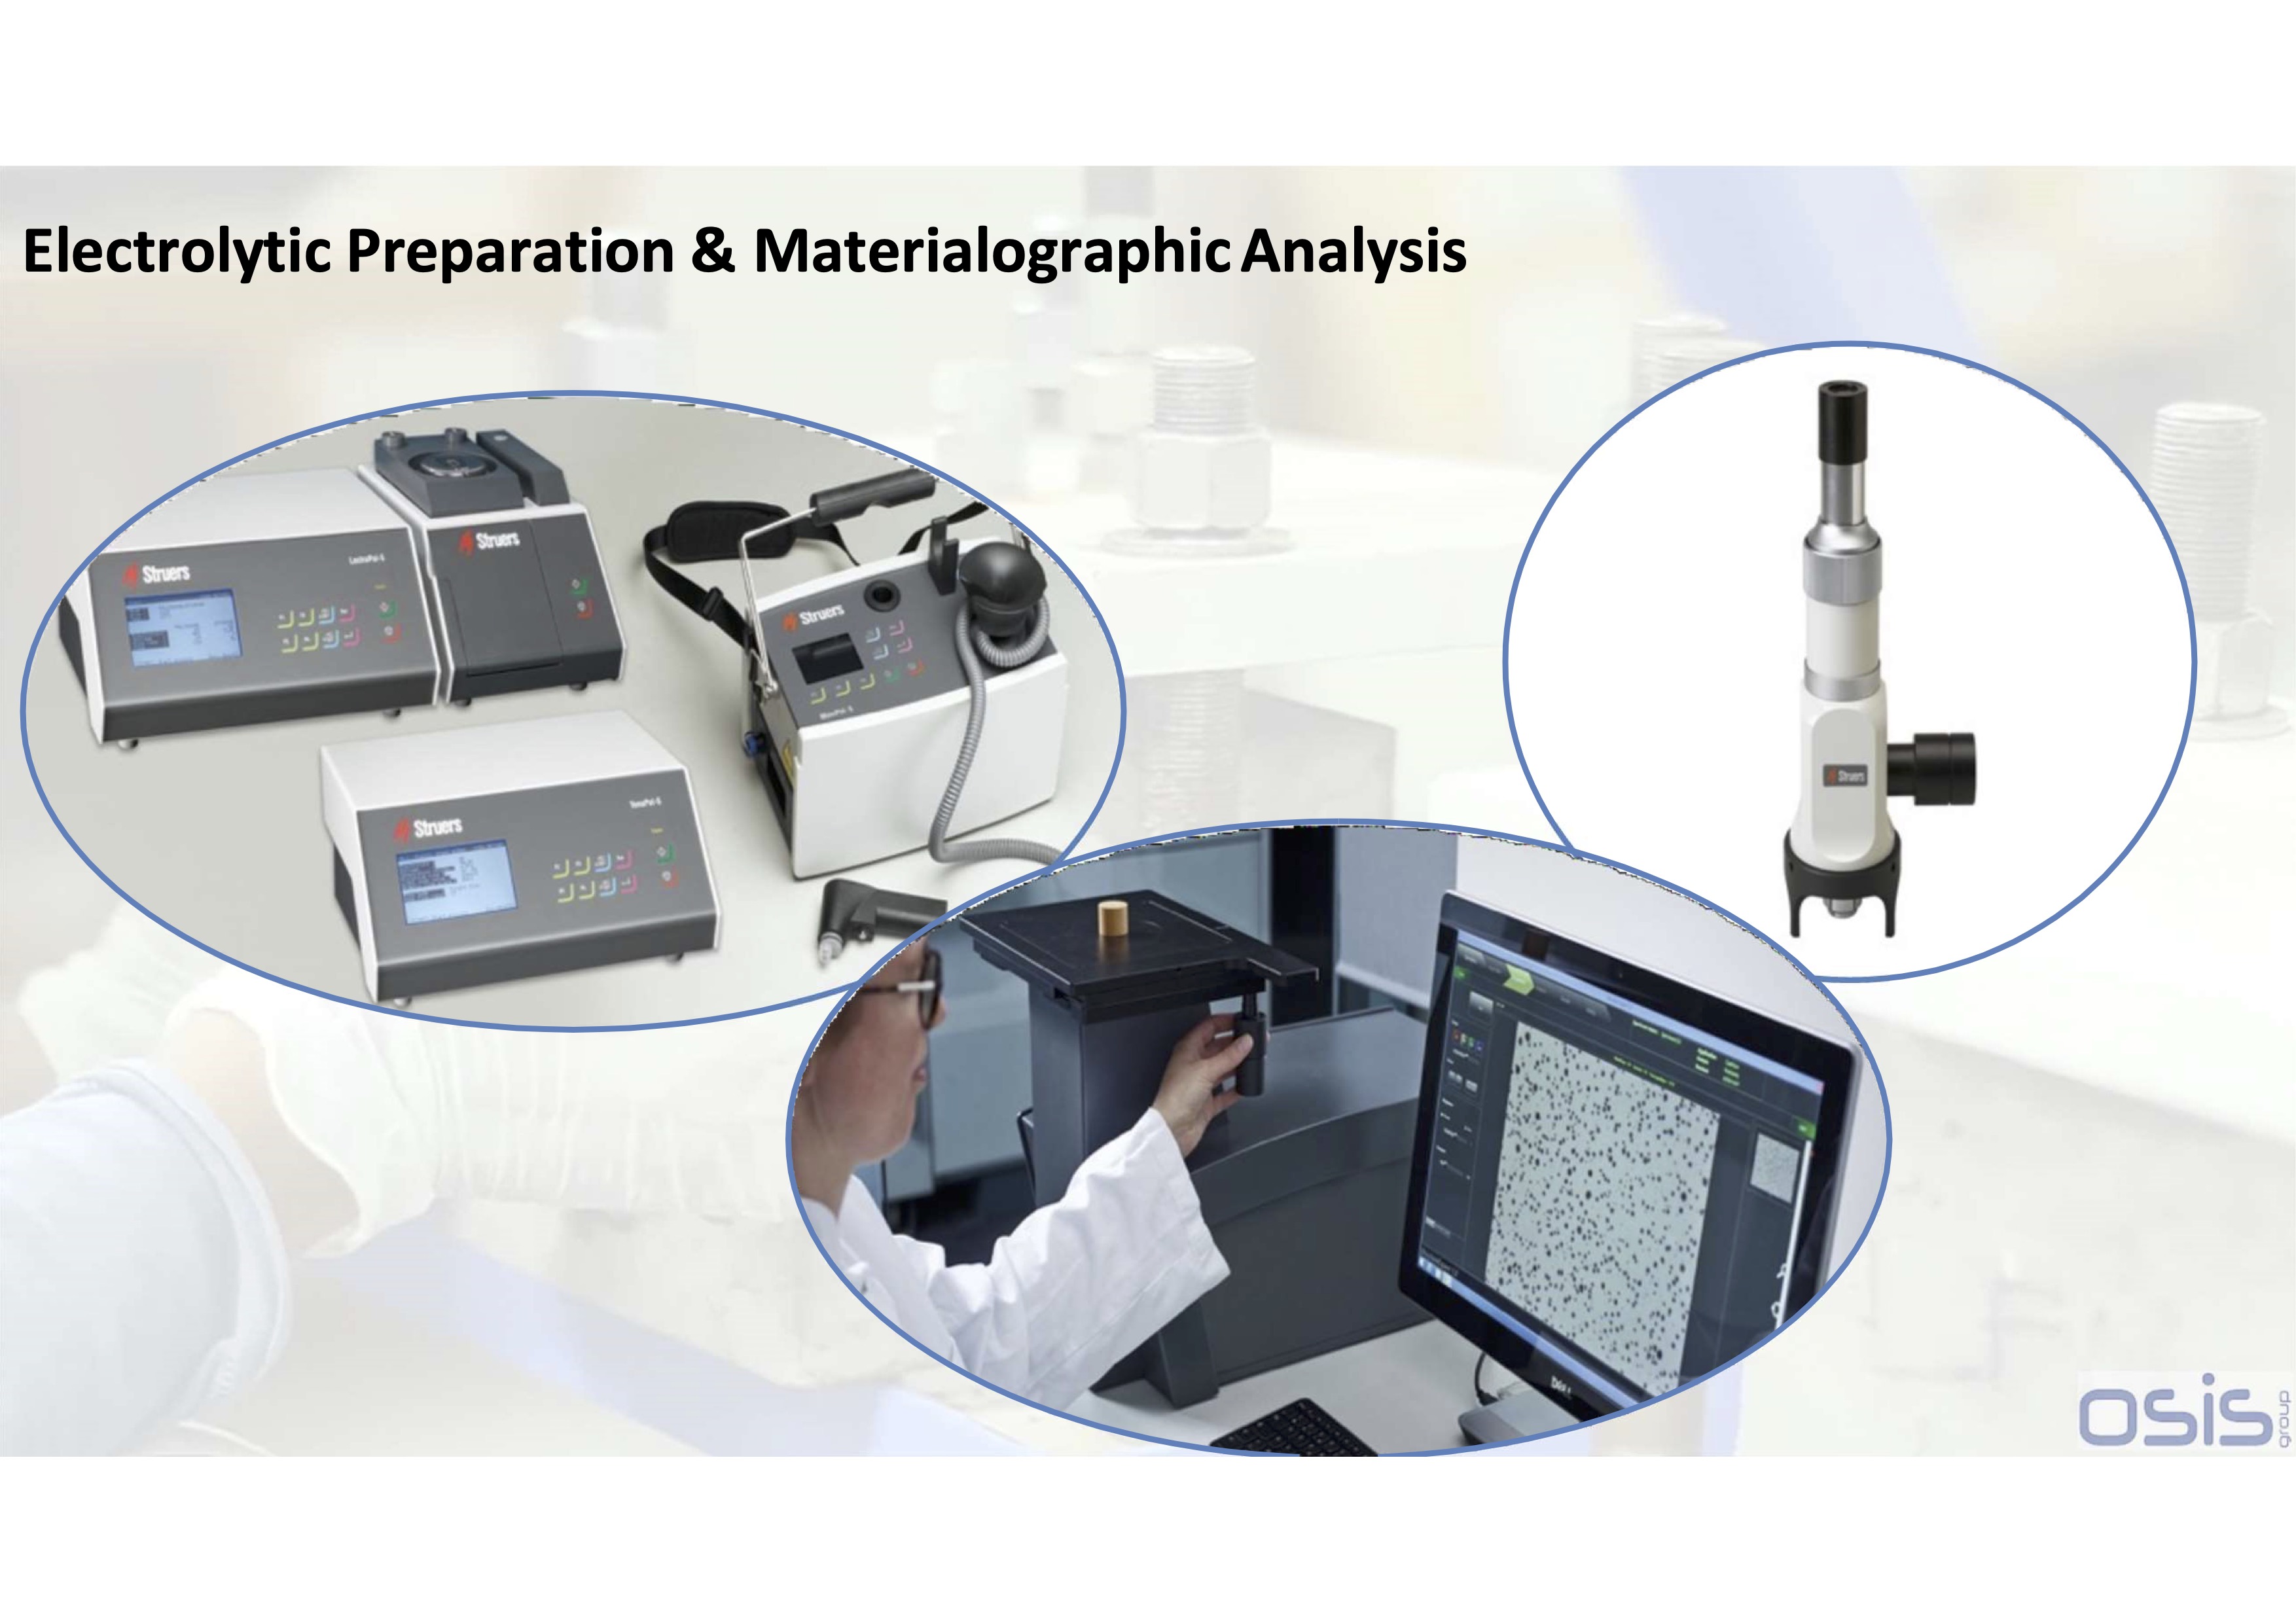 Electrolytic Preparation & Materialographic Analysis